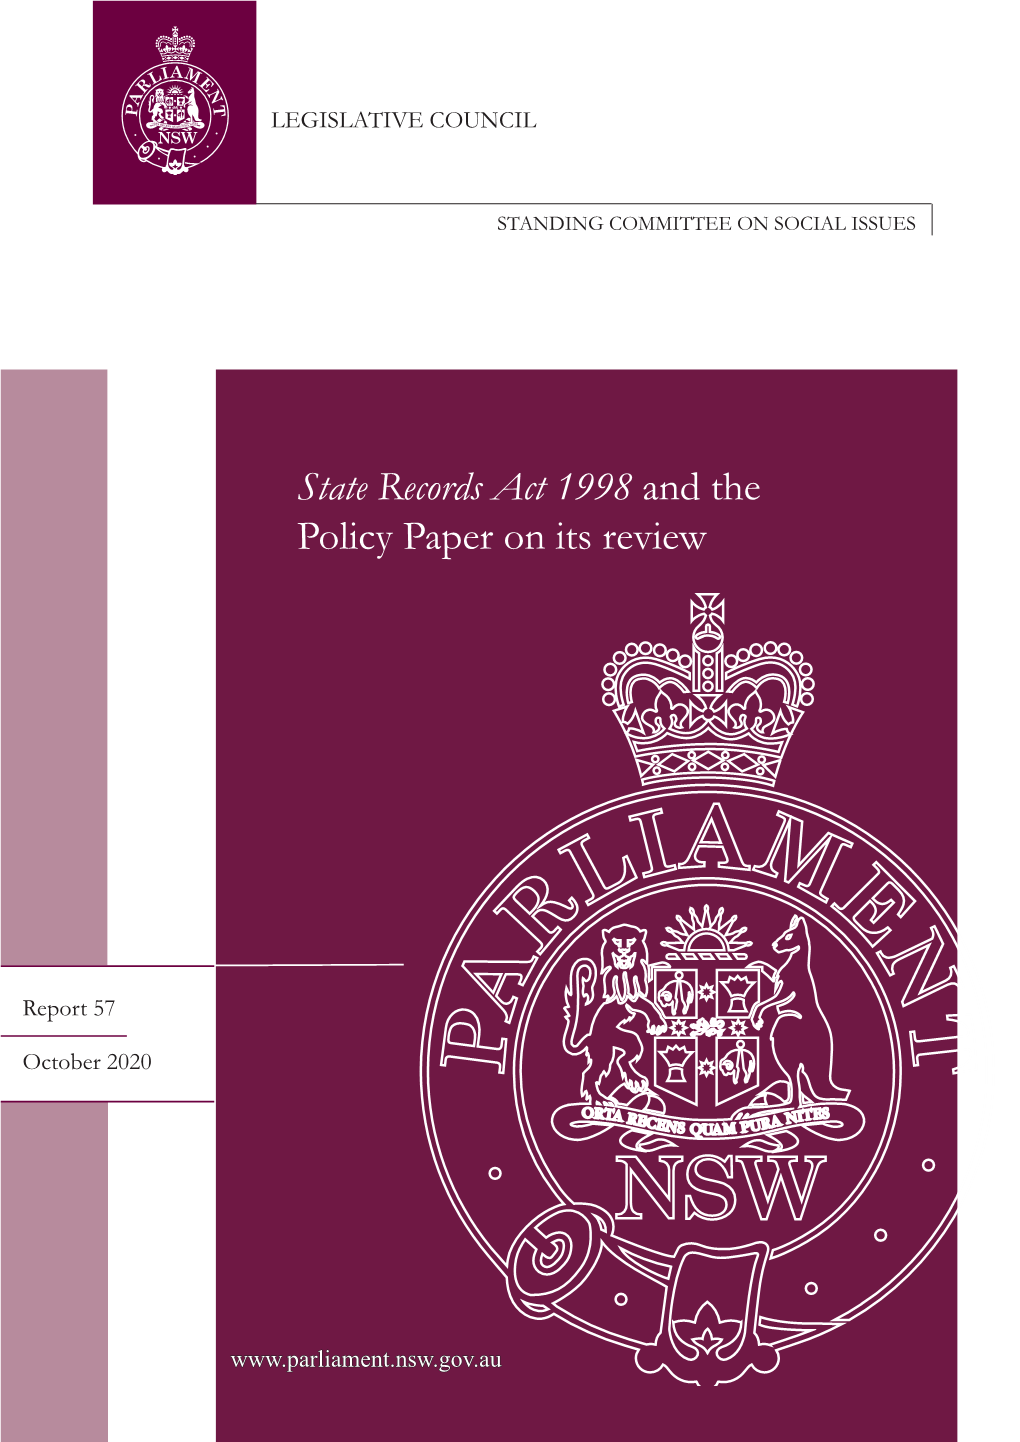 State Records Act 1998 and the Policy Paper on Its Review